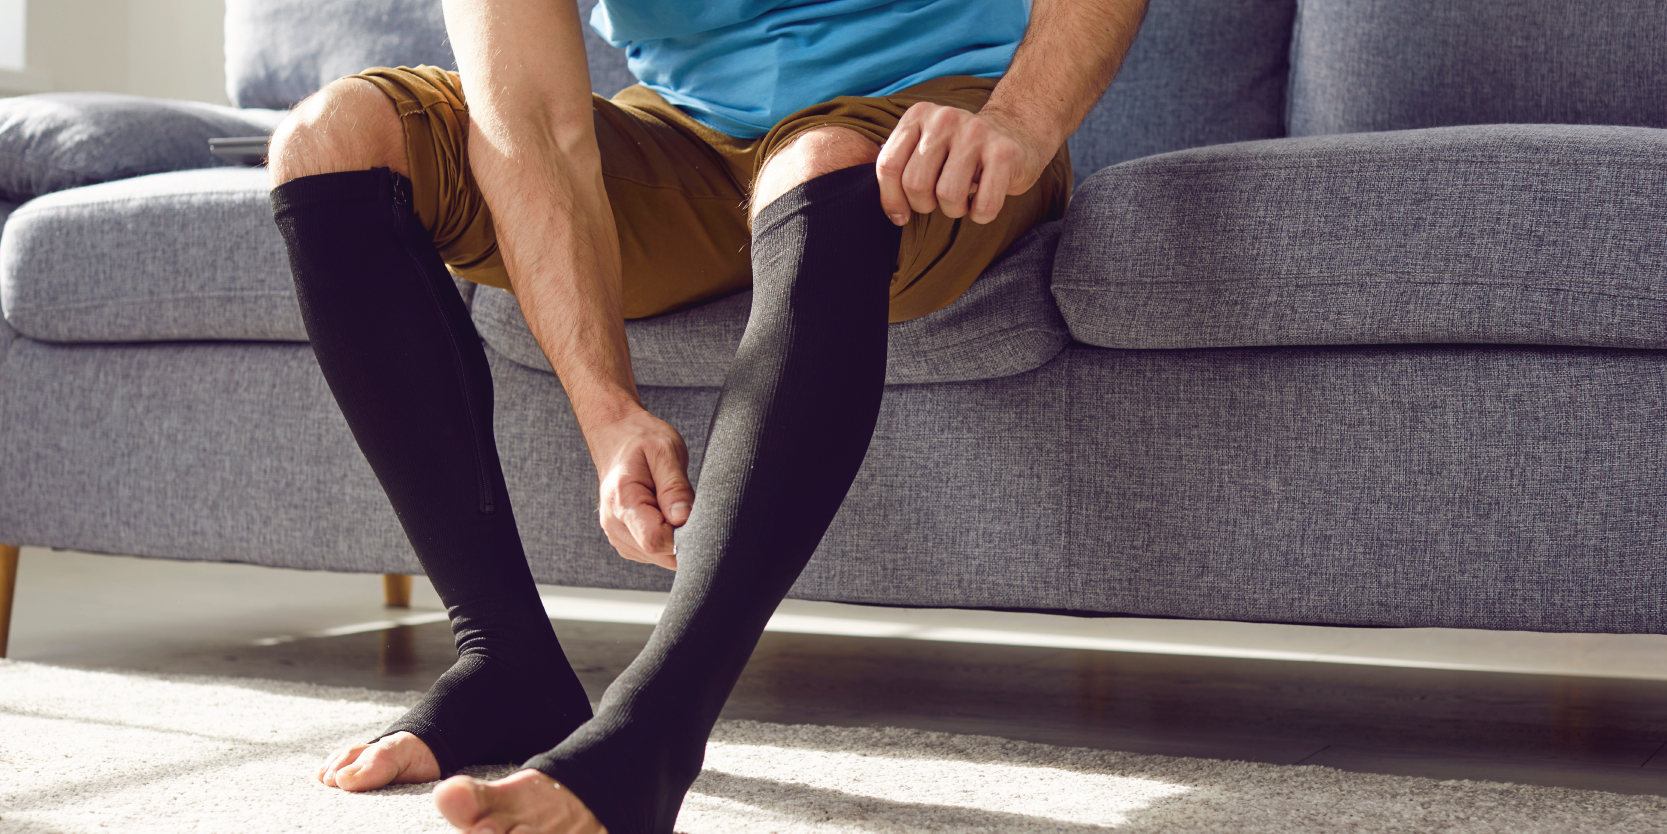 Improving Blood Flow: Compression Garments for Varicose Veins and Circulatory Issues